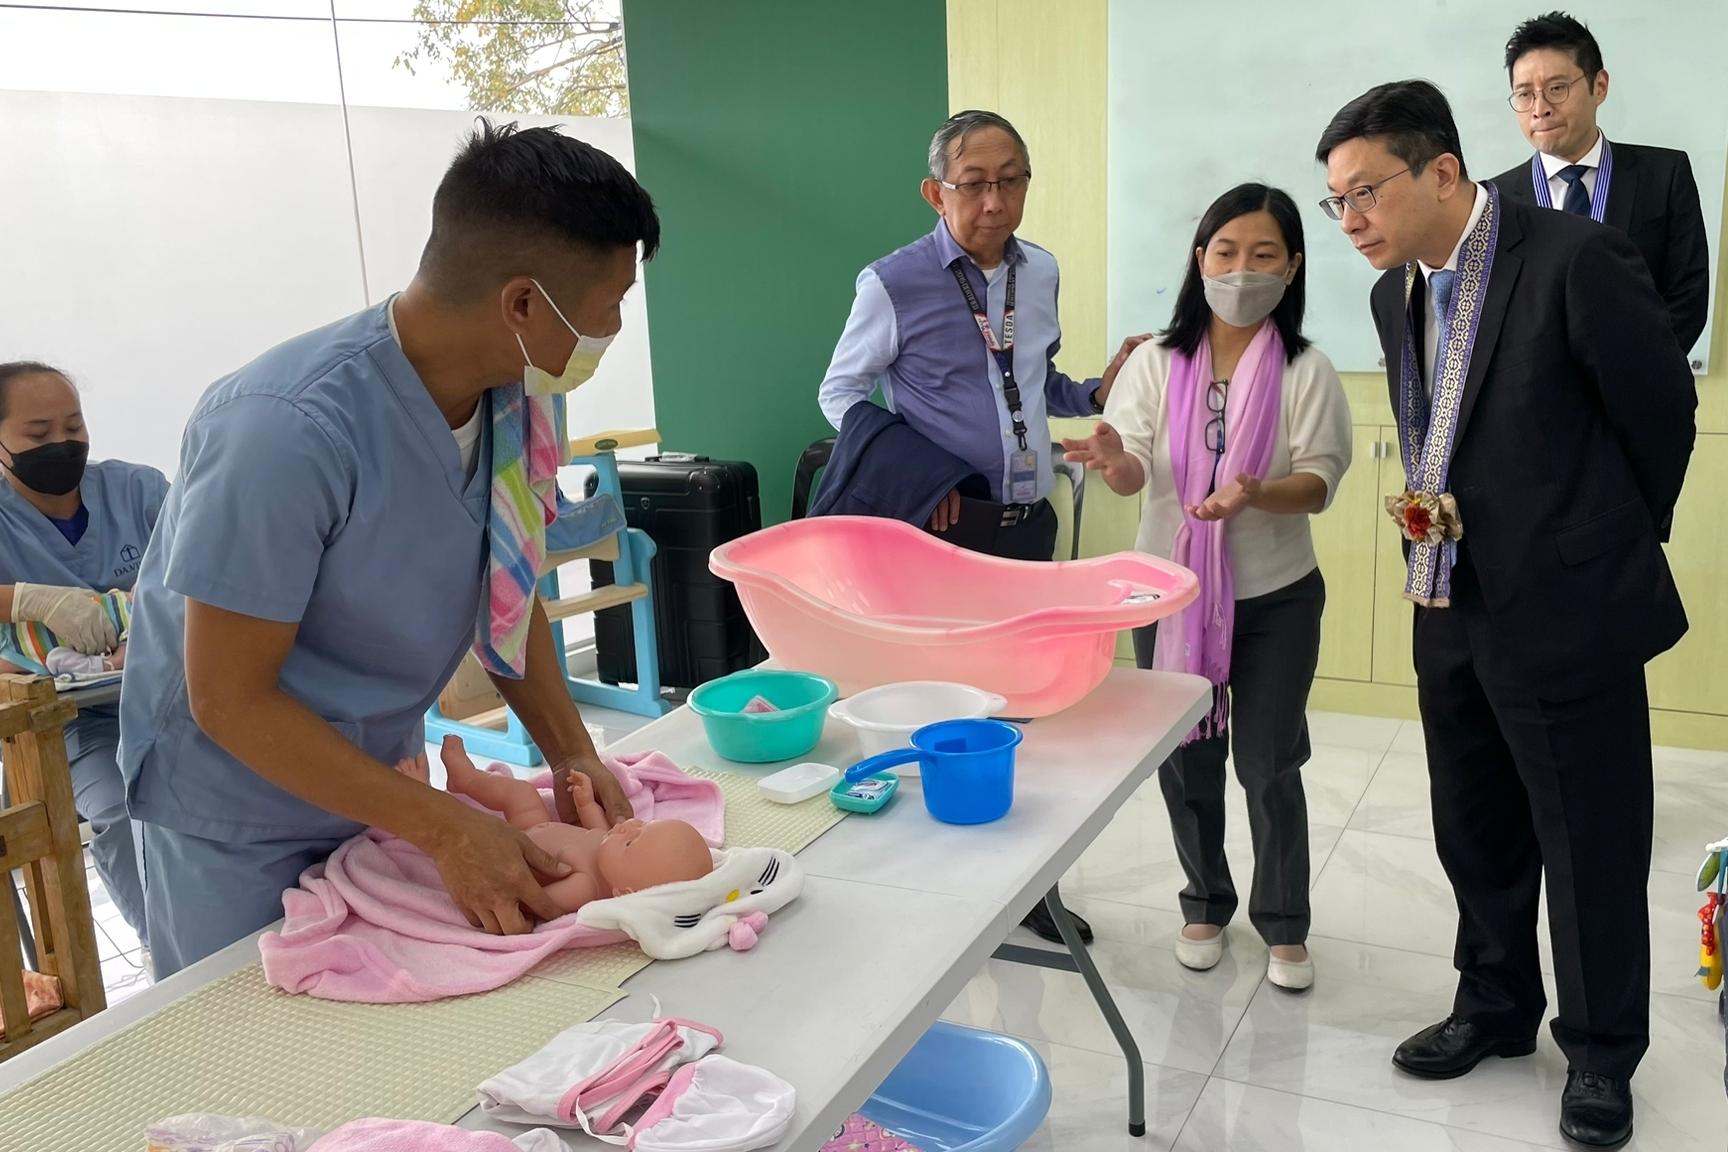 The Secretary for Labour and Welfare, Mr Chris Sun, visited a training facility under the Technical Education and Skills Development Authority this morning (January 10) during his visit to Manila, the Philippines, to take a closer look at the training of care workers. Photo shows Mr Sun (first right) watching a trainee's demonstration of bathing newborn babies.